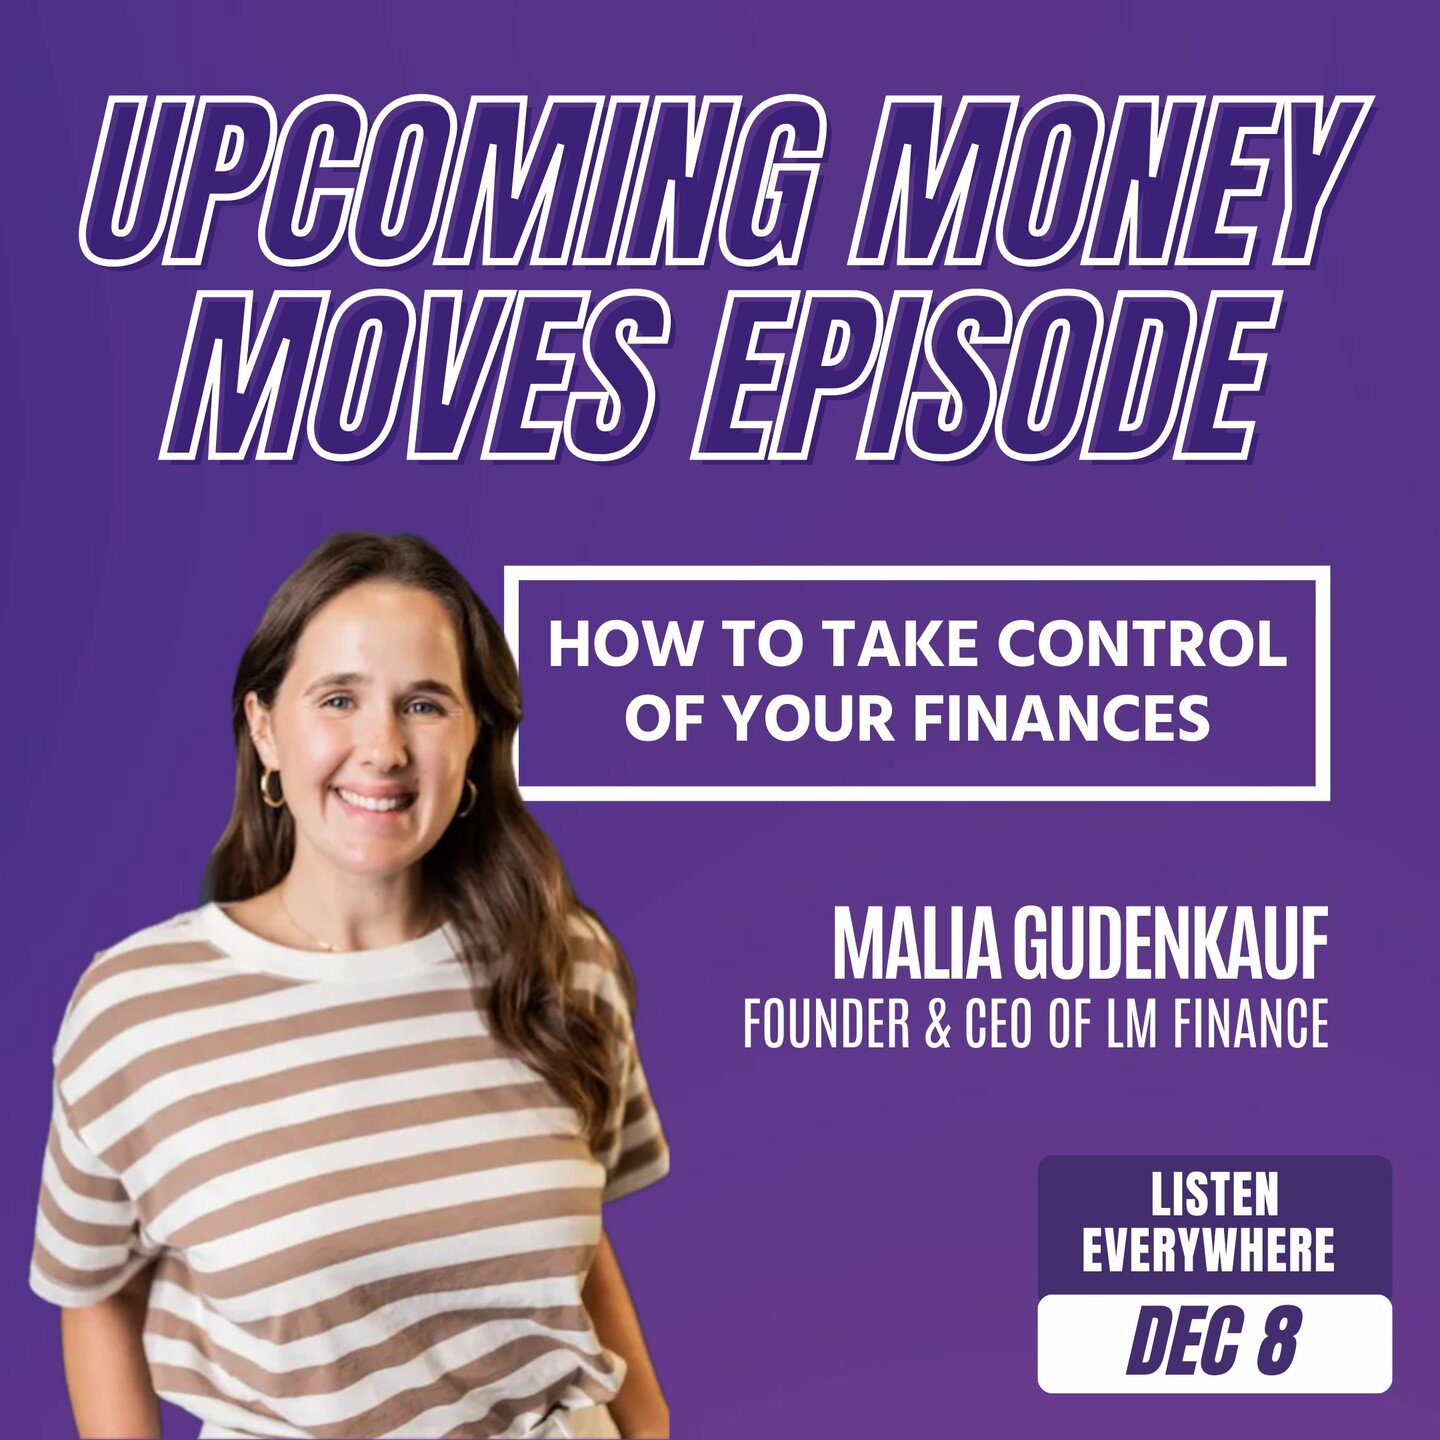 🎙️&nbsp;New #MoneyMovesPod: Taking Control of Your Finances with Malia Gudenkauf!

Malia will speak about her own personal financial journey and how she persevered through challenges to reach a greater goal with more freedom when it came to her life